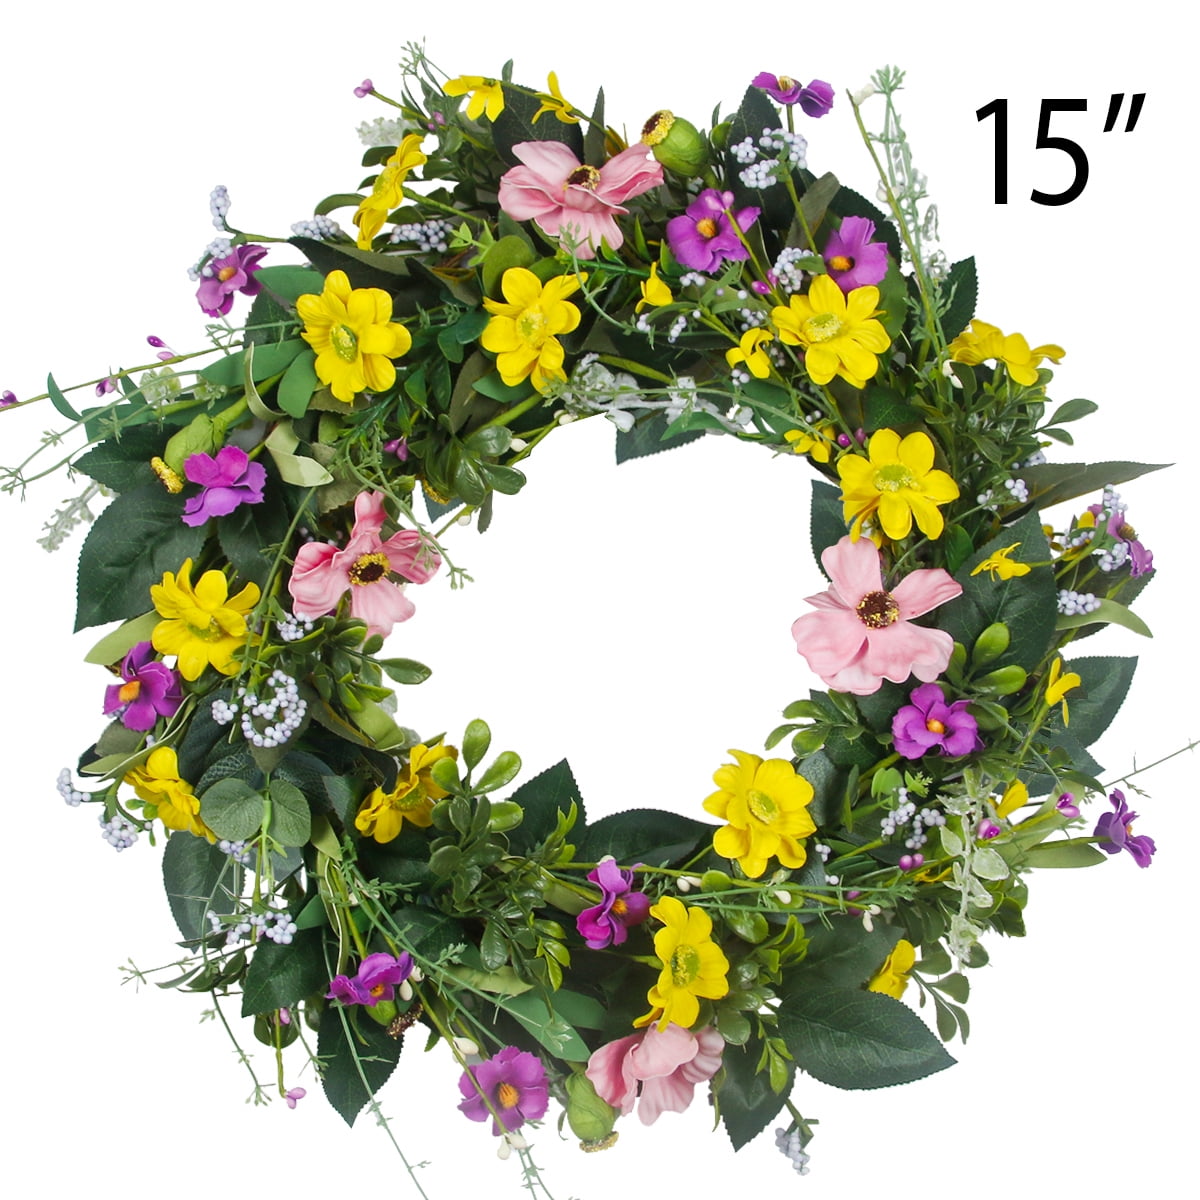 Summer Wreath Everyday Wreath Country Wreath Hoop Wreath with Greenery Spring Wreath for Front Door Greenery Wreath with Wildflowers